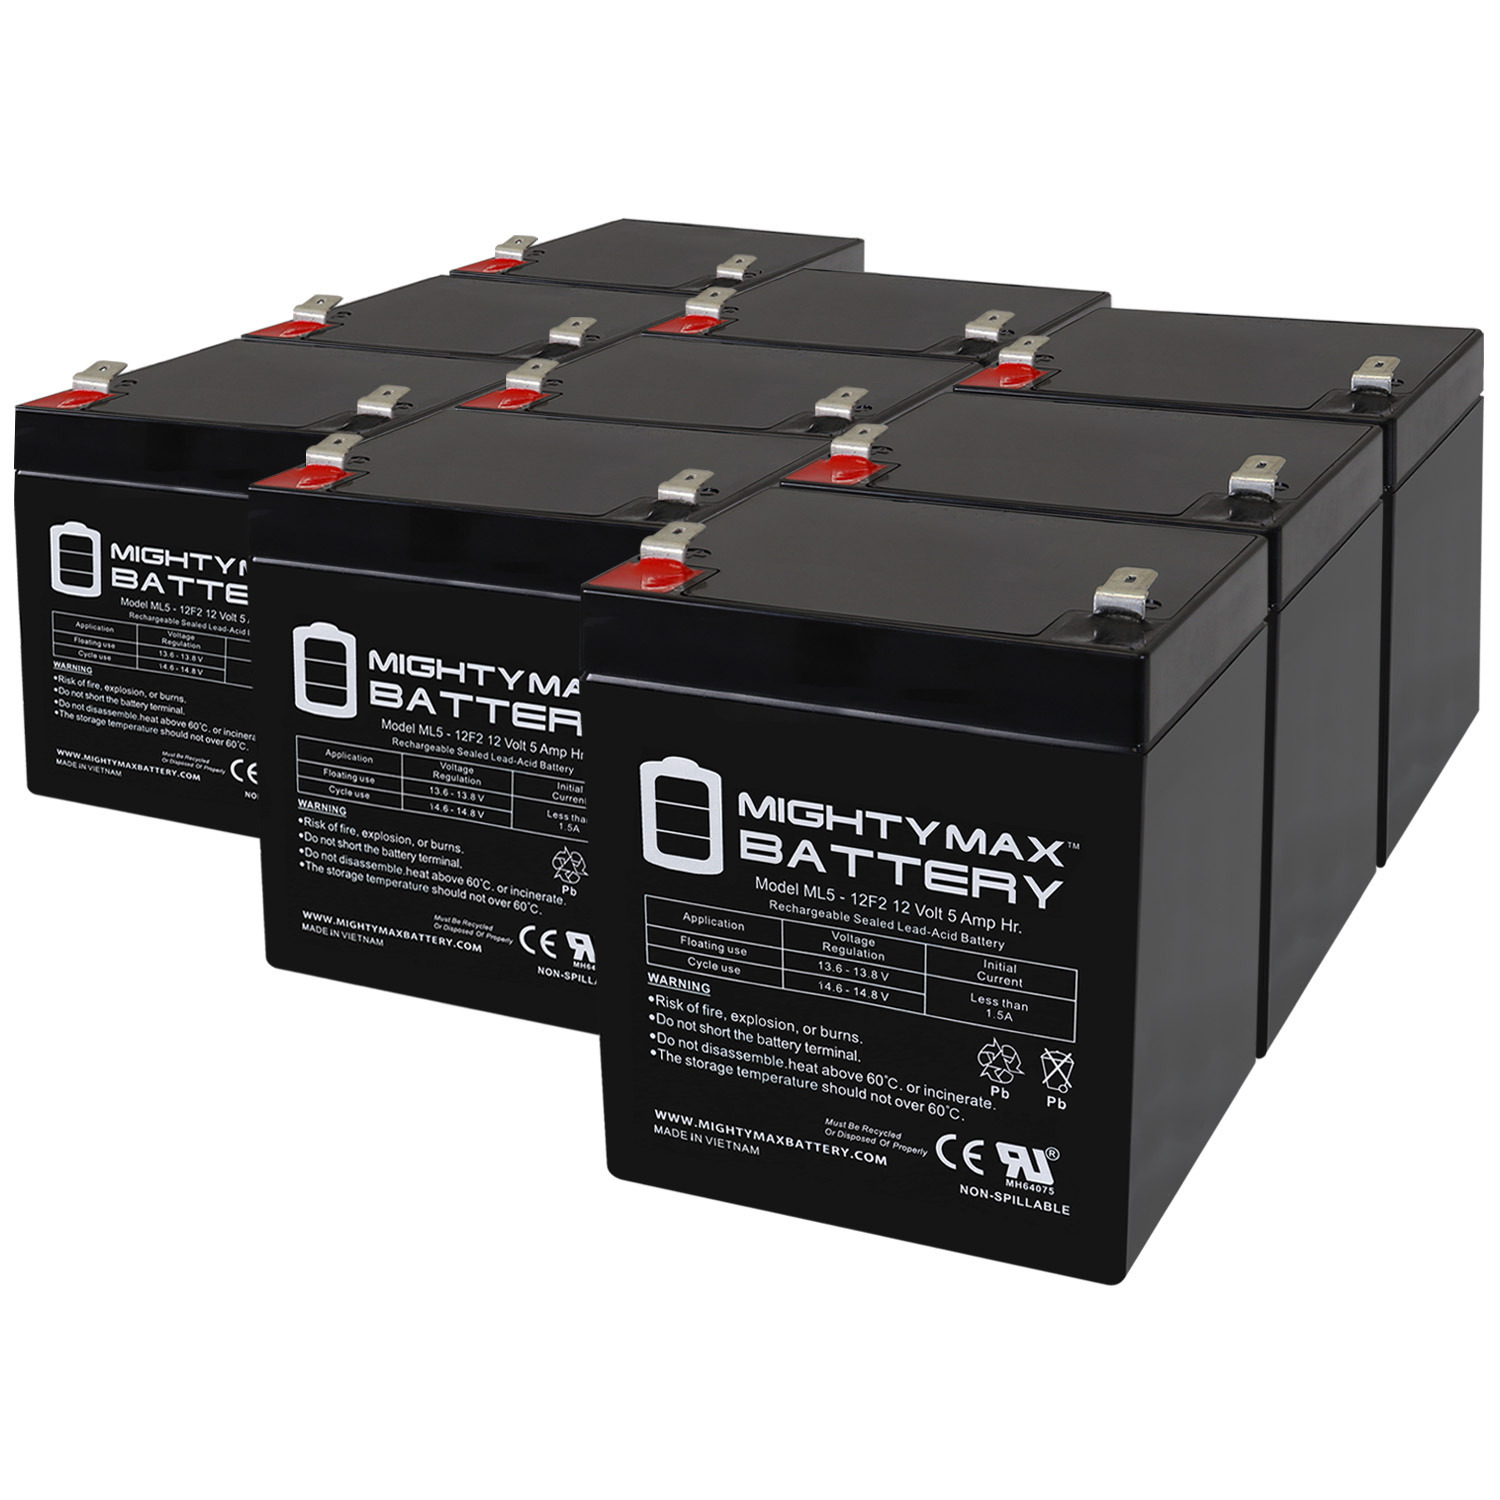 12V 5Ah F2 SLA Replacement Battery for Tripp Lite BC Personnal 280a - 9 Pack